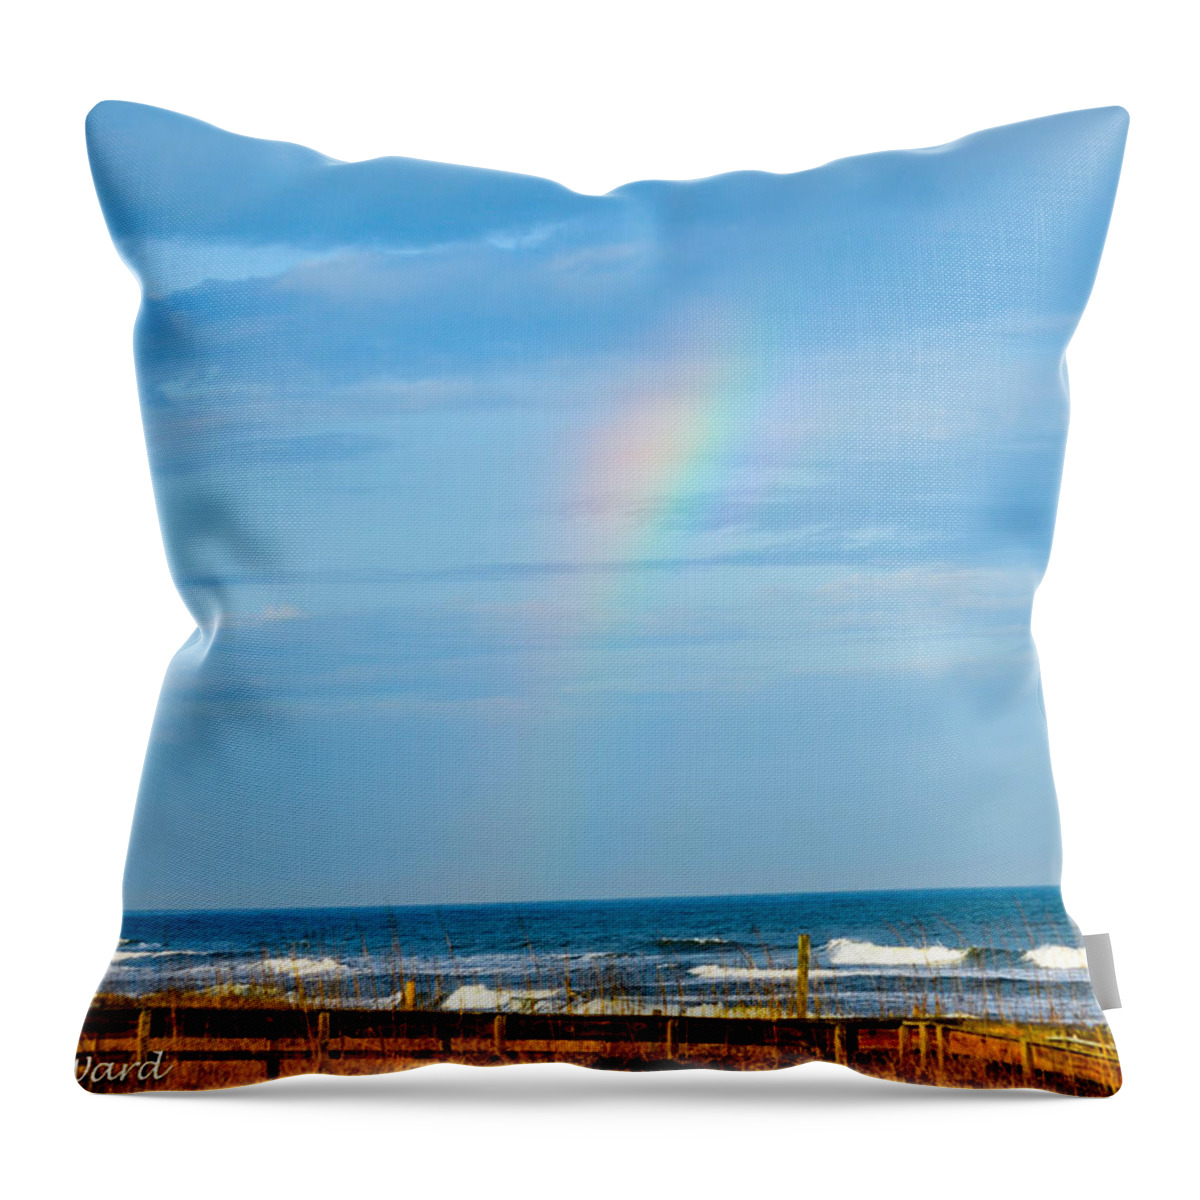 Blue Skies Throw Pillow featuring the photograph Out Of The Blue by Mary Hahn Ward